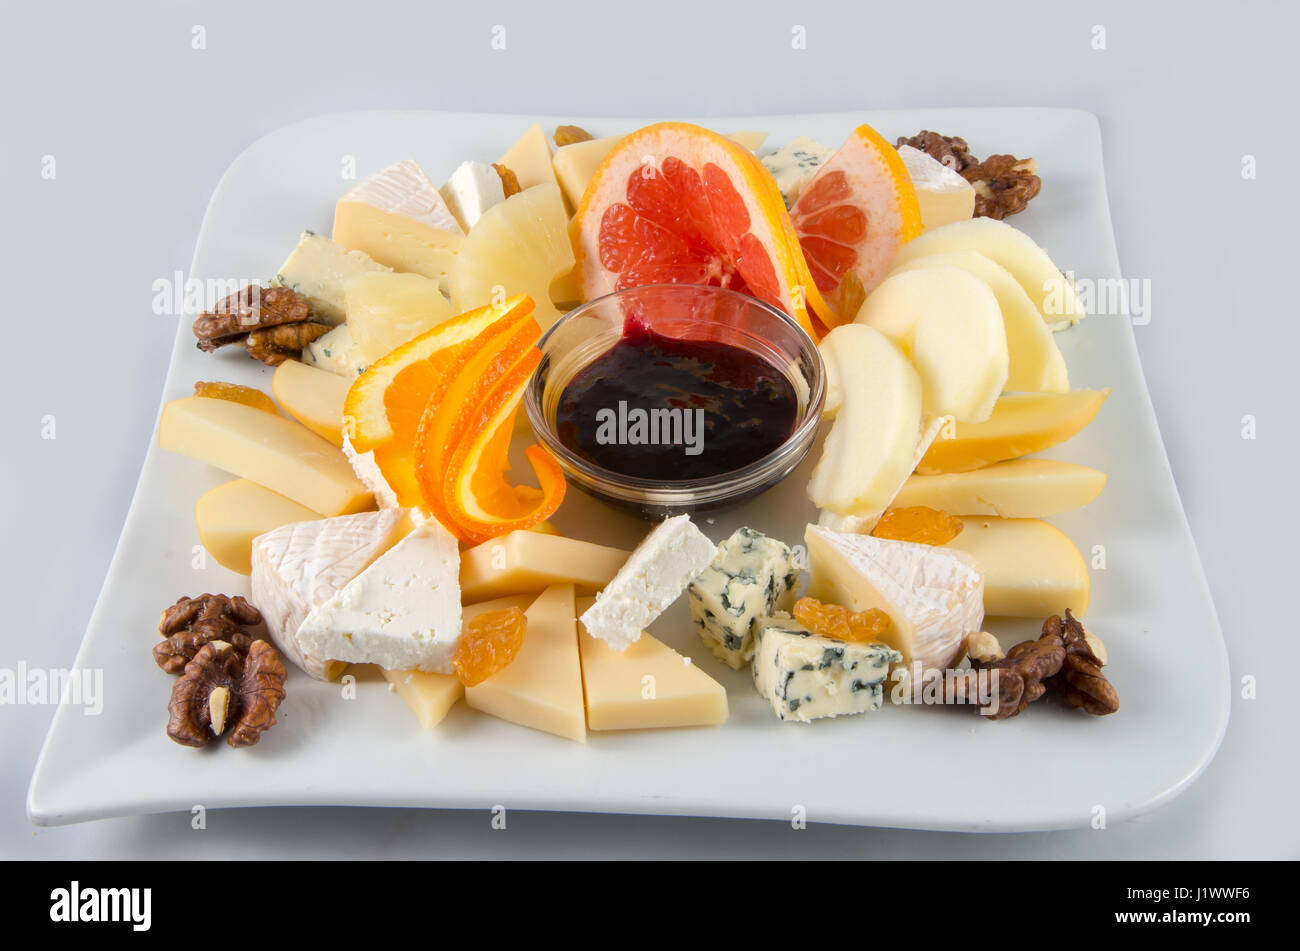 Fruit salad with nuts, raisins and cheese. Stock Photo